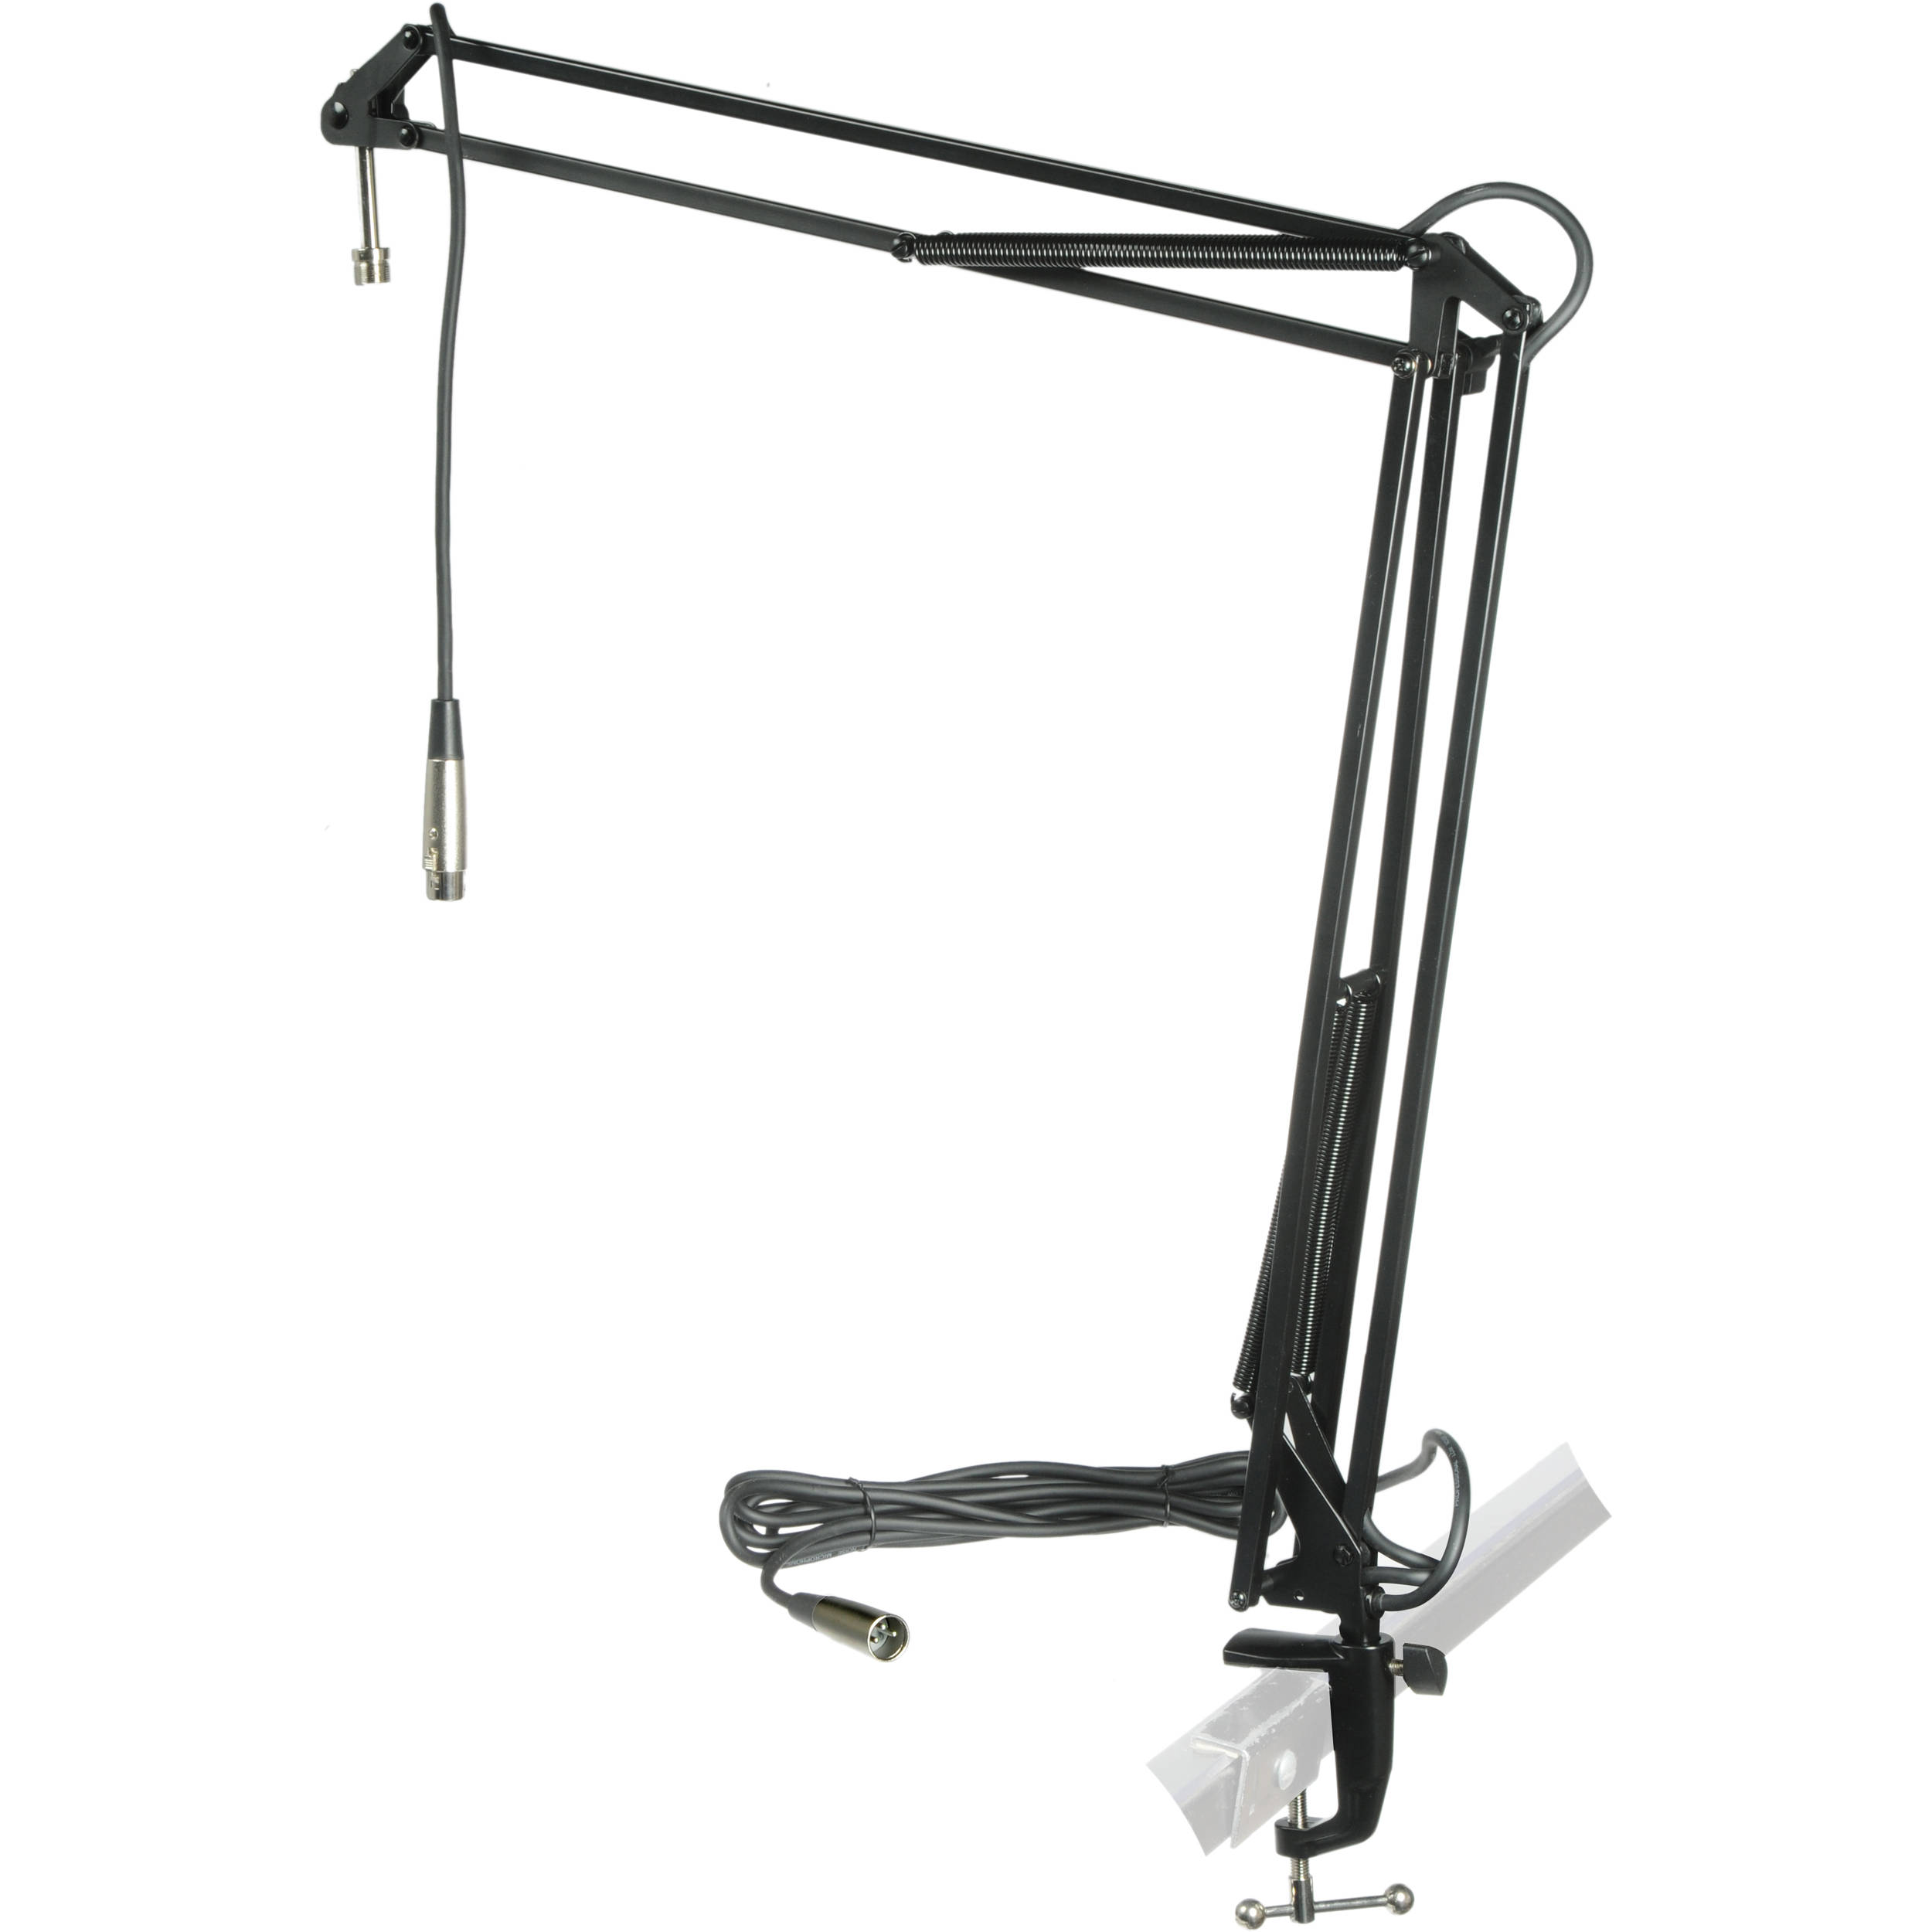 Mxl Bcd Stand Desktop Microphone Stand Bcd Stand B H Photo Video